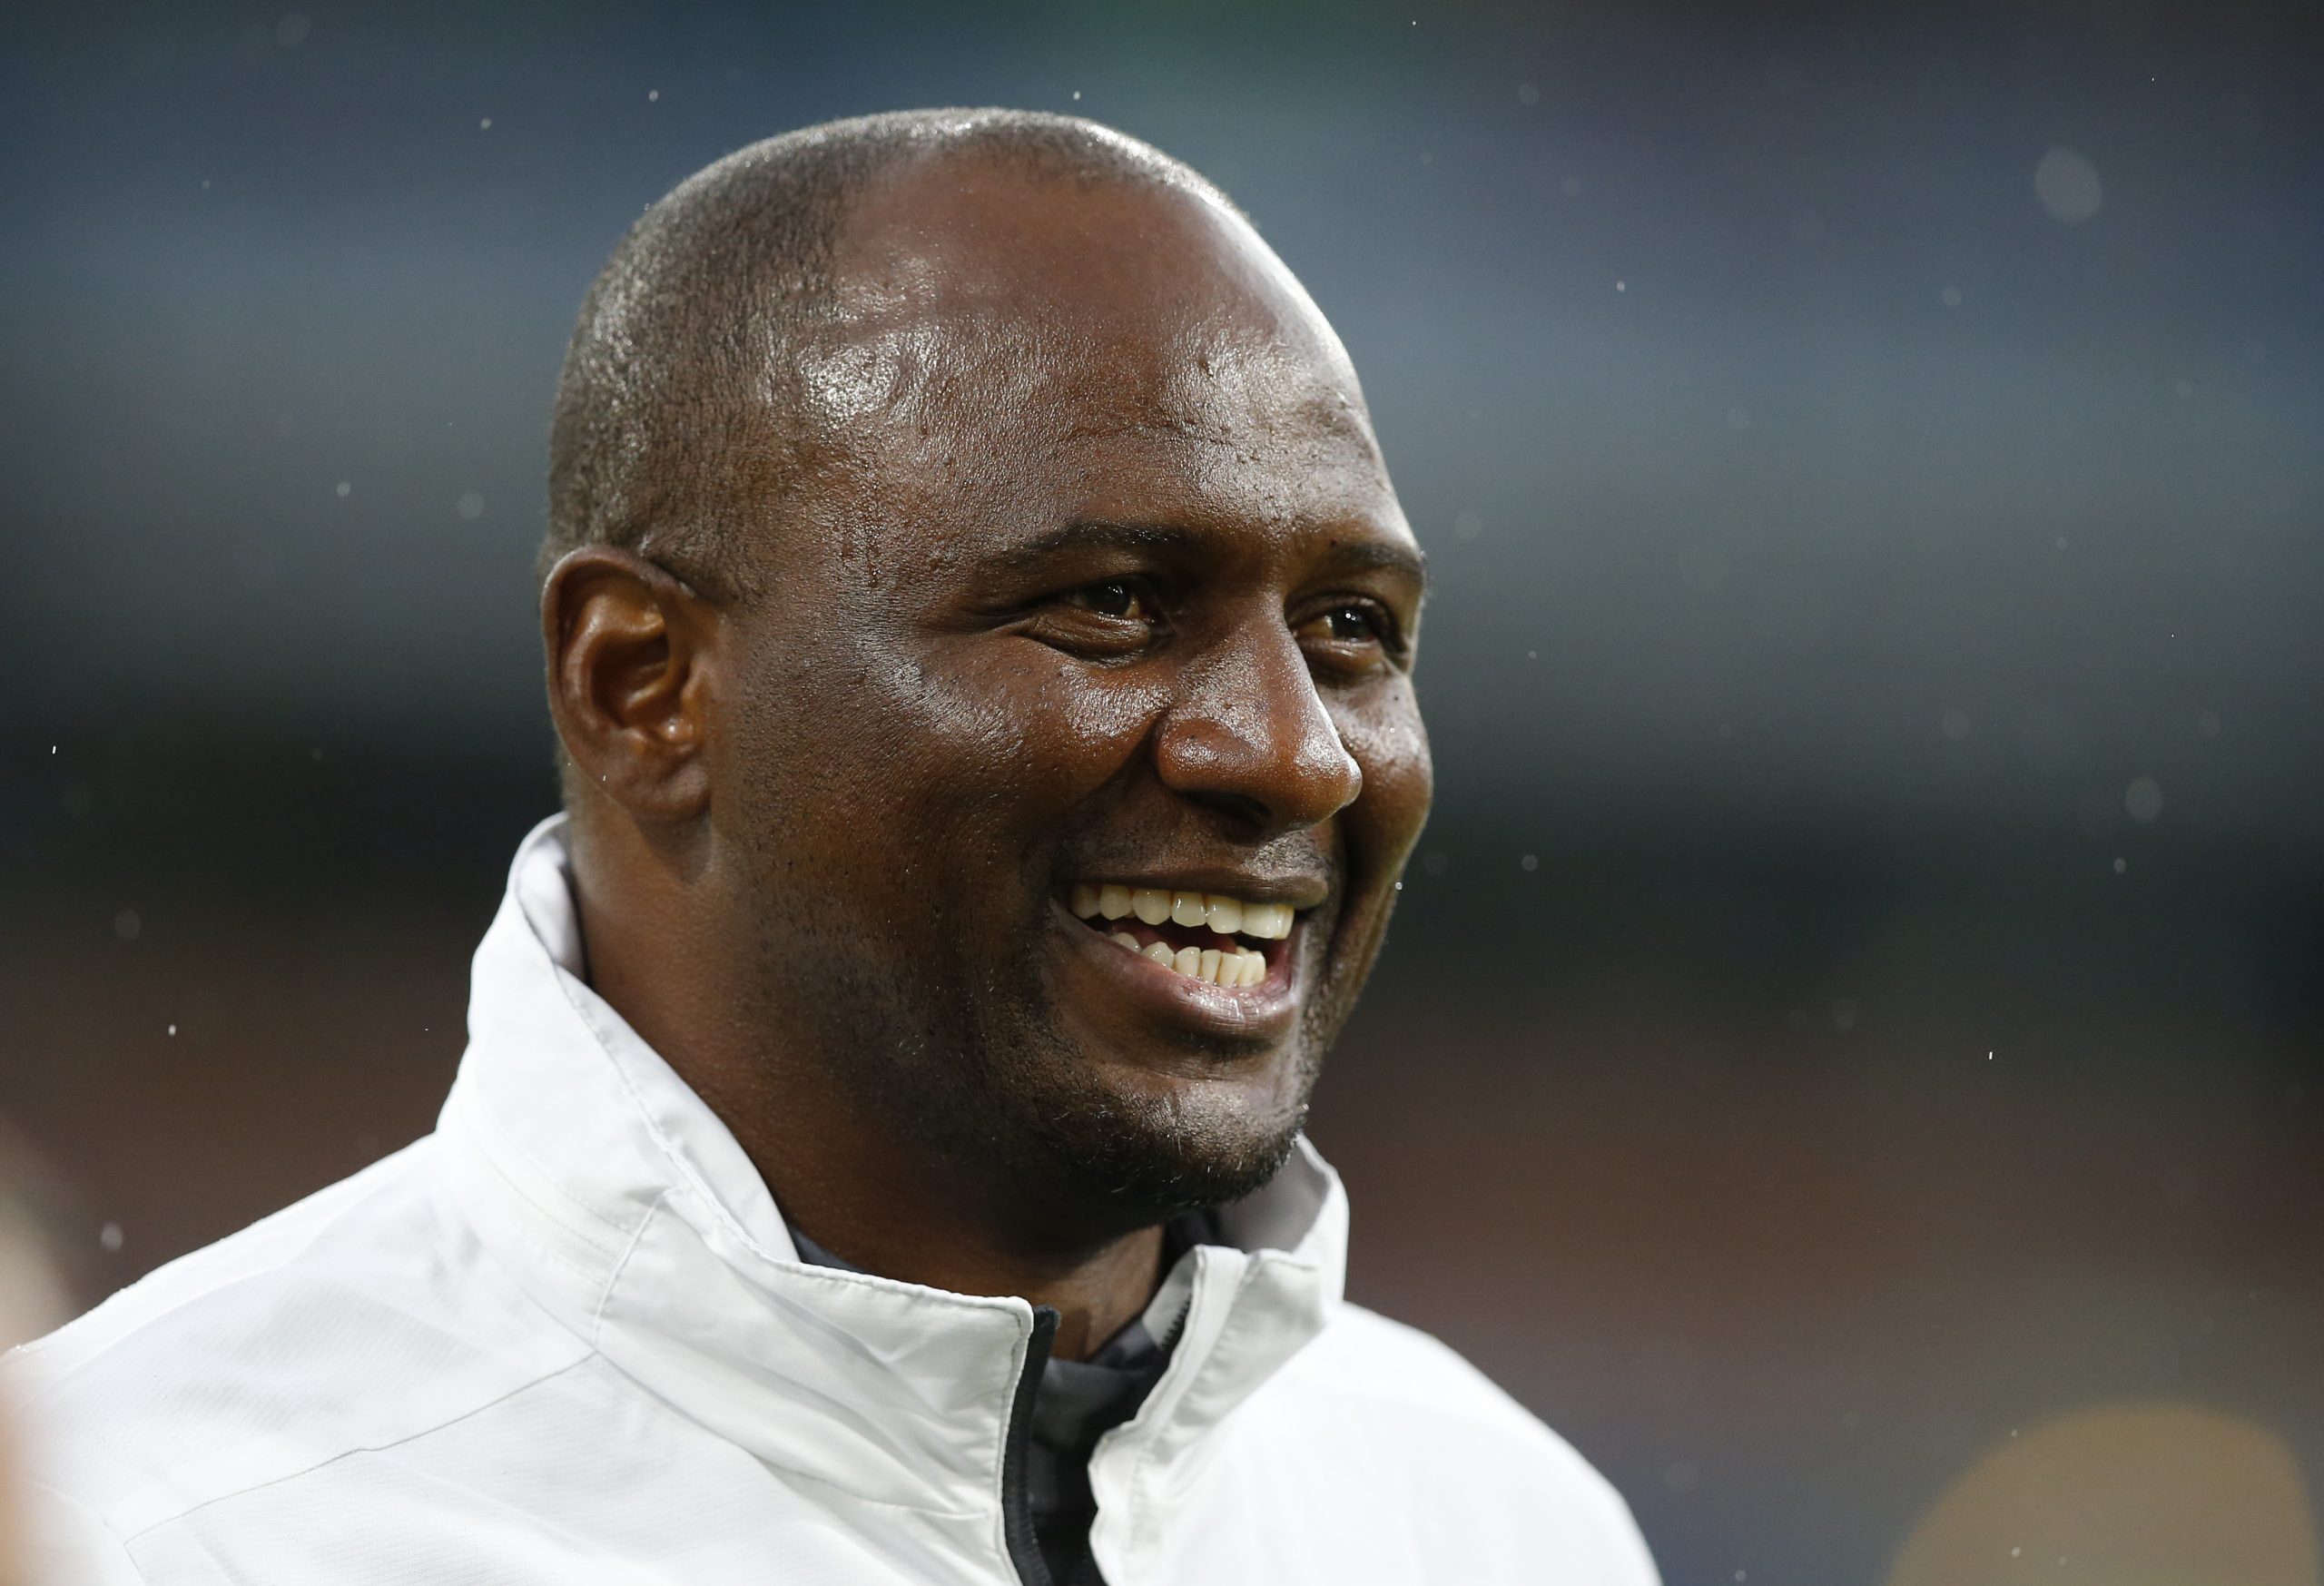 July 30, 2019, Burnley, United Kingdom: Patrick Vieira manager of Nice during the Pre Season Friendly match at Turf Moor, Burnley. Picture date: 30th July 2019. Picture credit should read: Andrew Yates/Sportimage(Credit Image: © Andrew Yates/CSM via ZUMA Wire) (Cal Sport Media via AP Images)